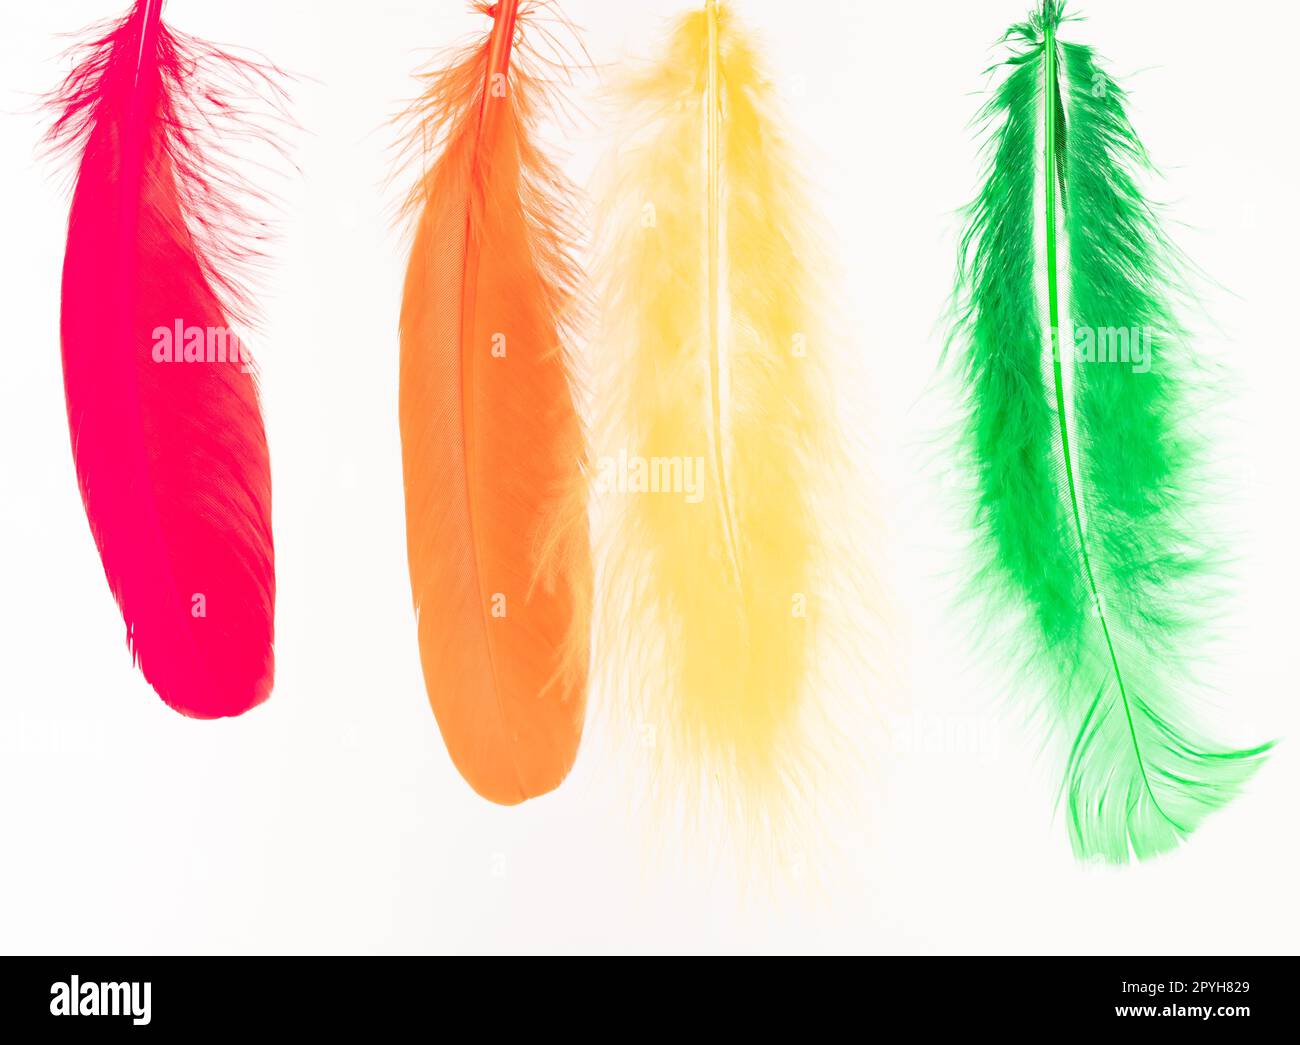 Red, orange, yellow and green feathers on white background Stock Photo